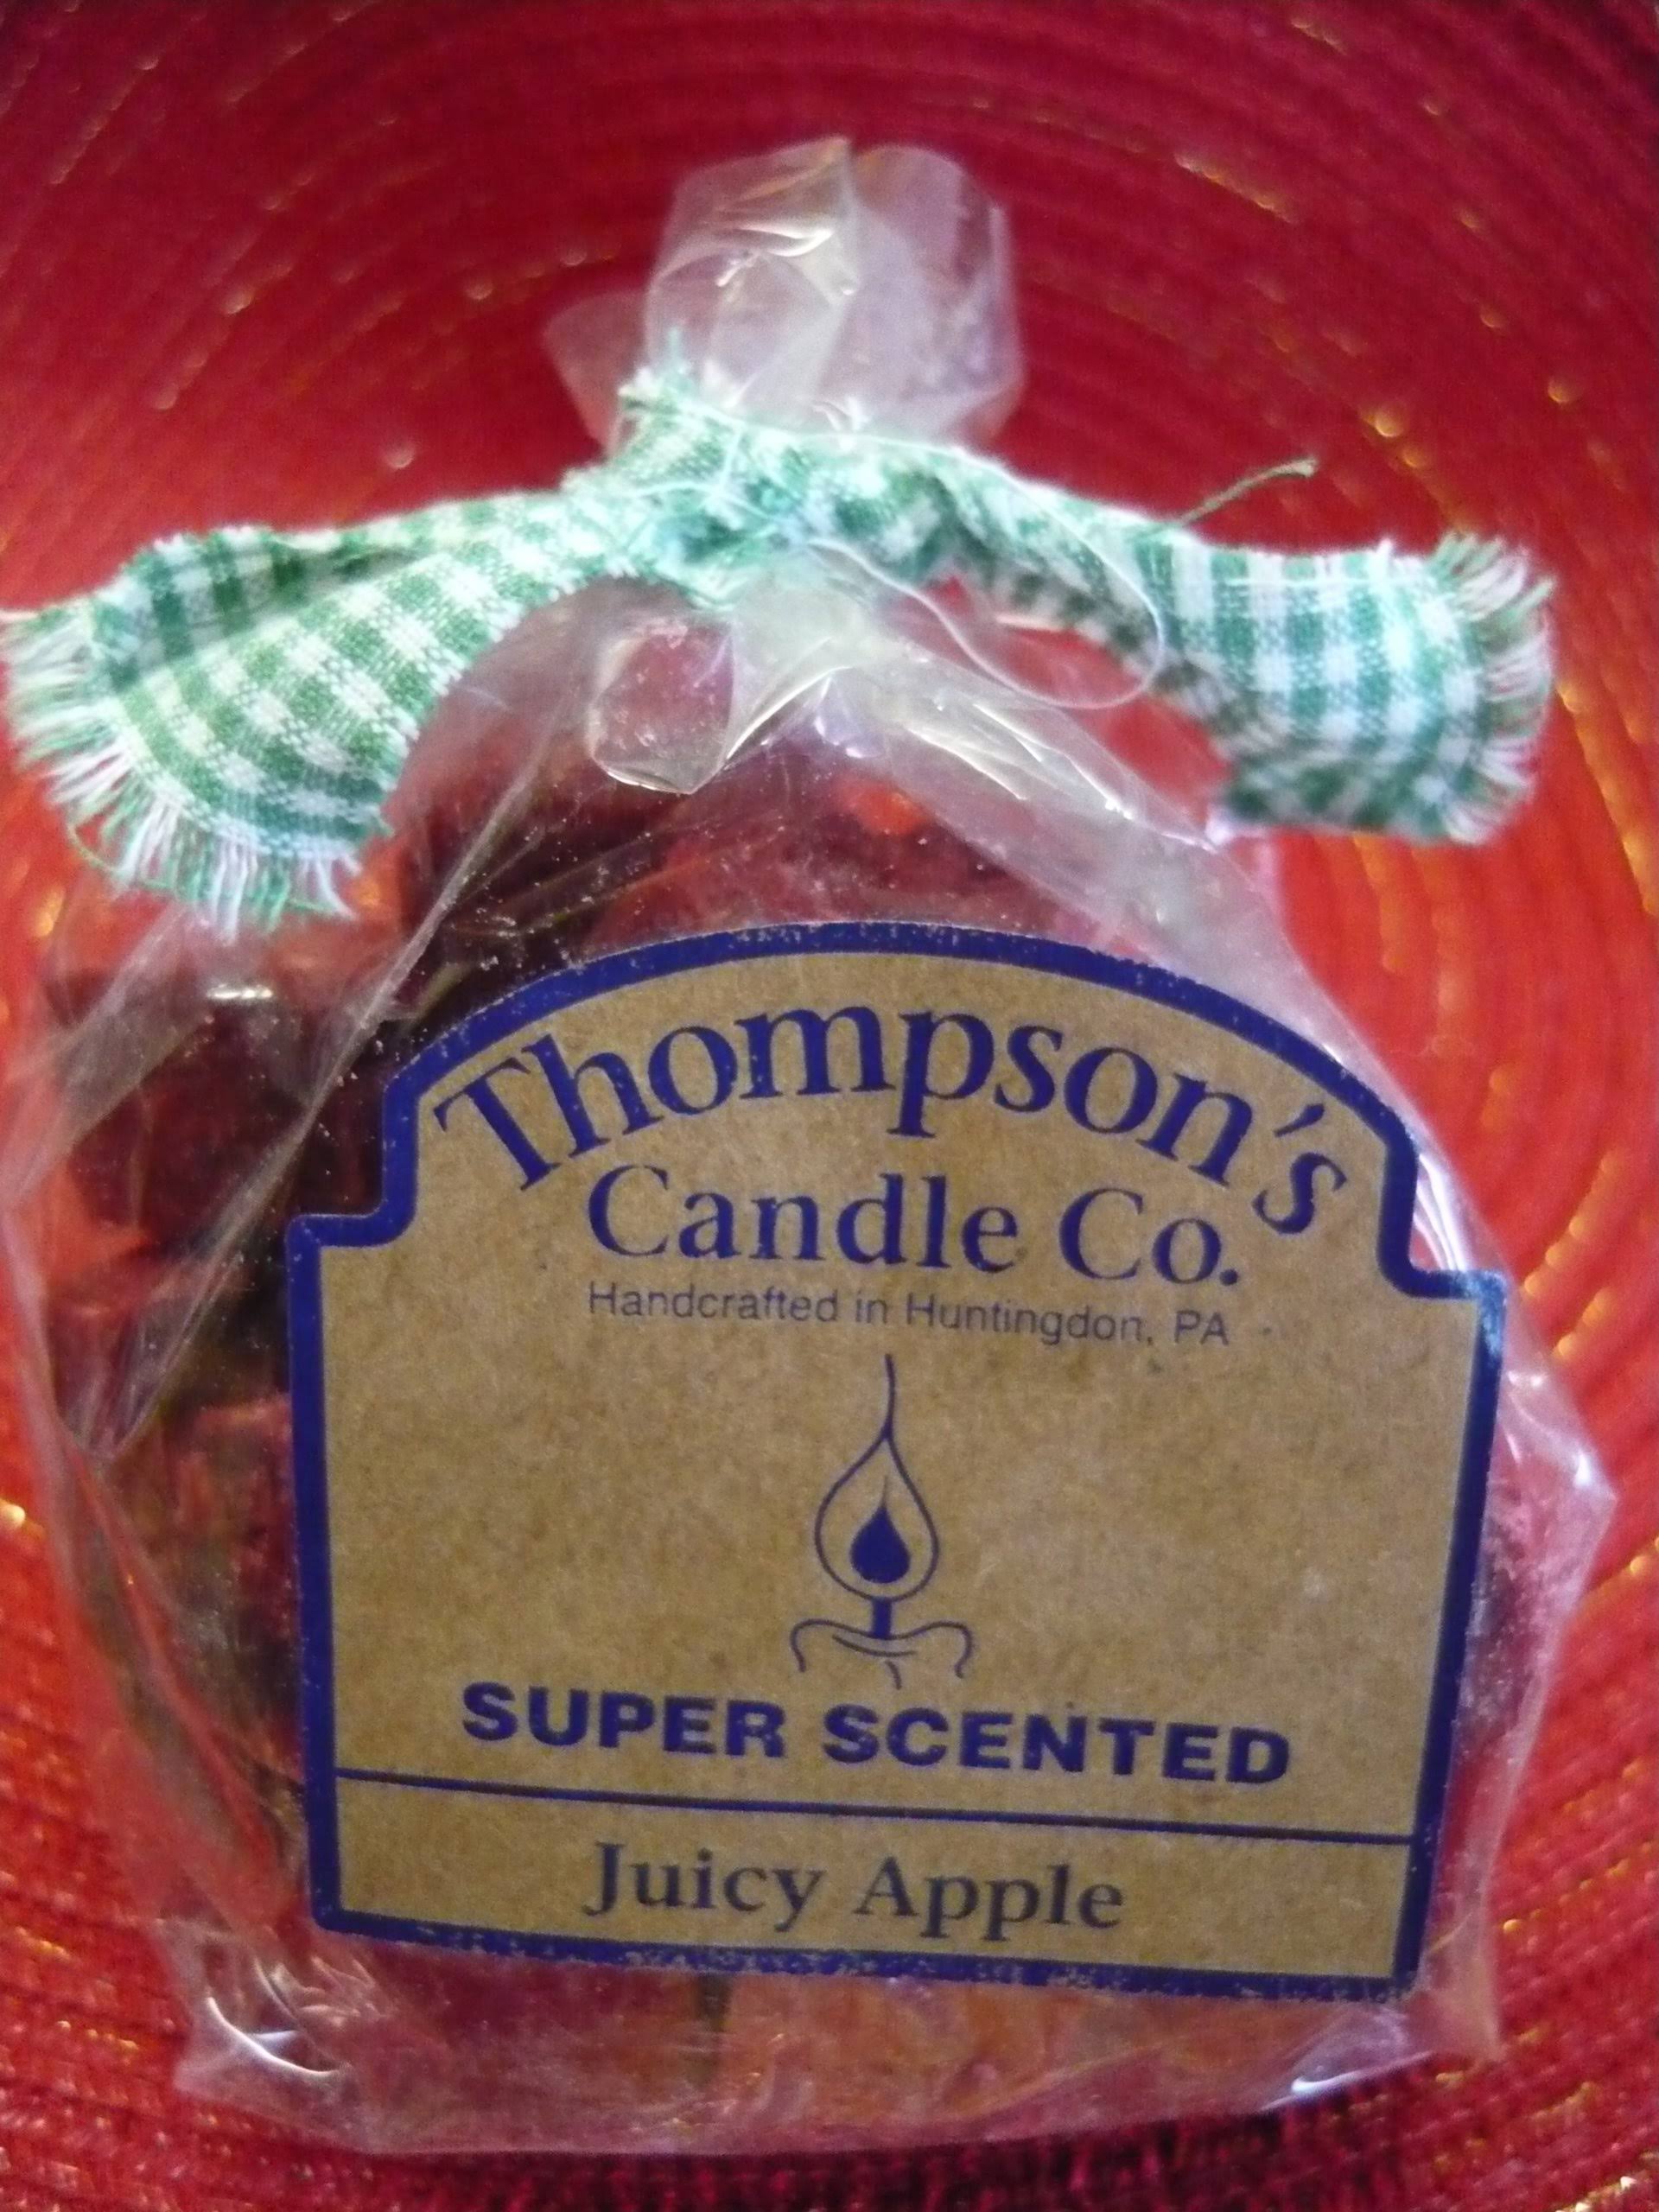 Thompson's Candle Co. Super Scented Crumbles 6 oz. - Juicy Apple